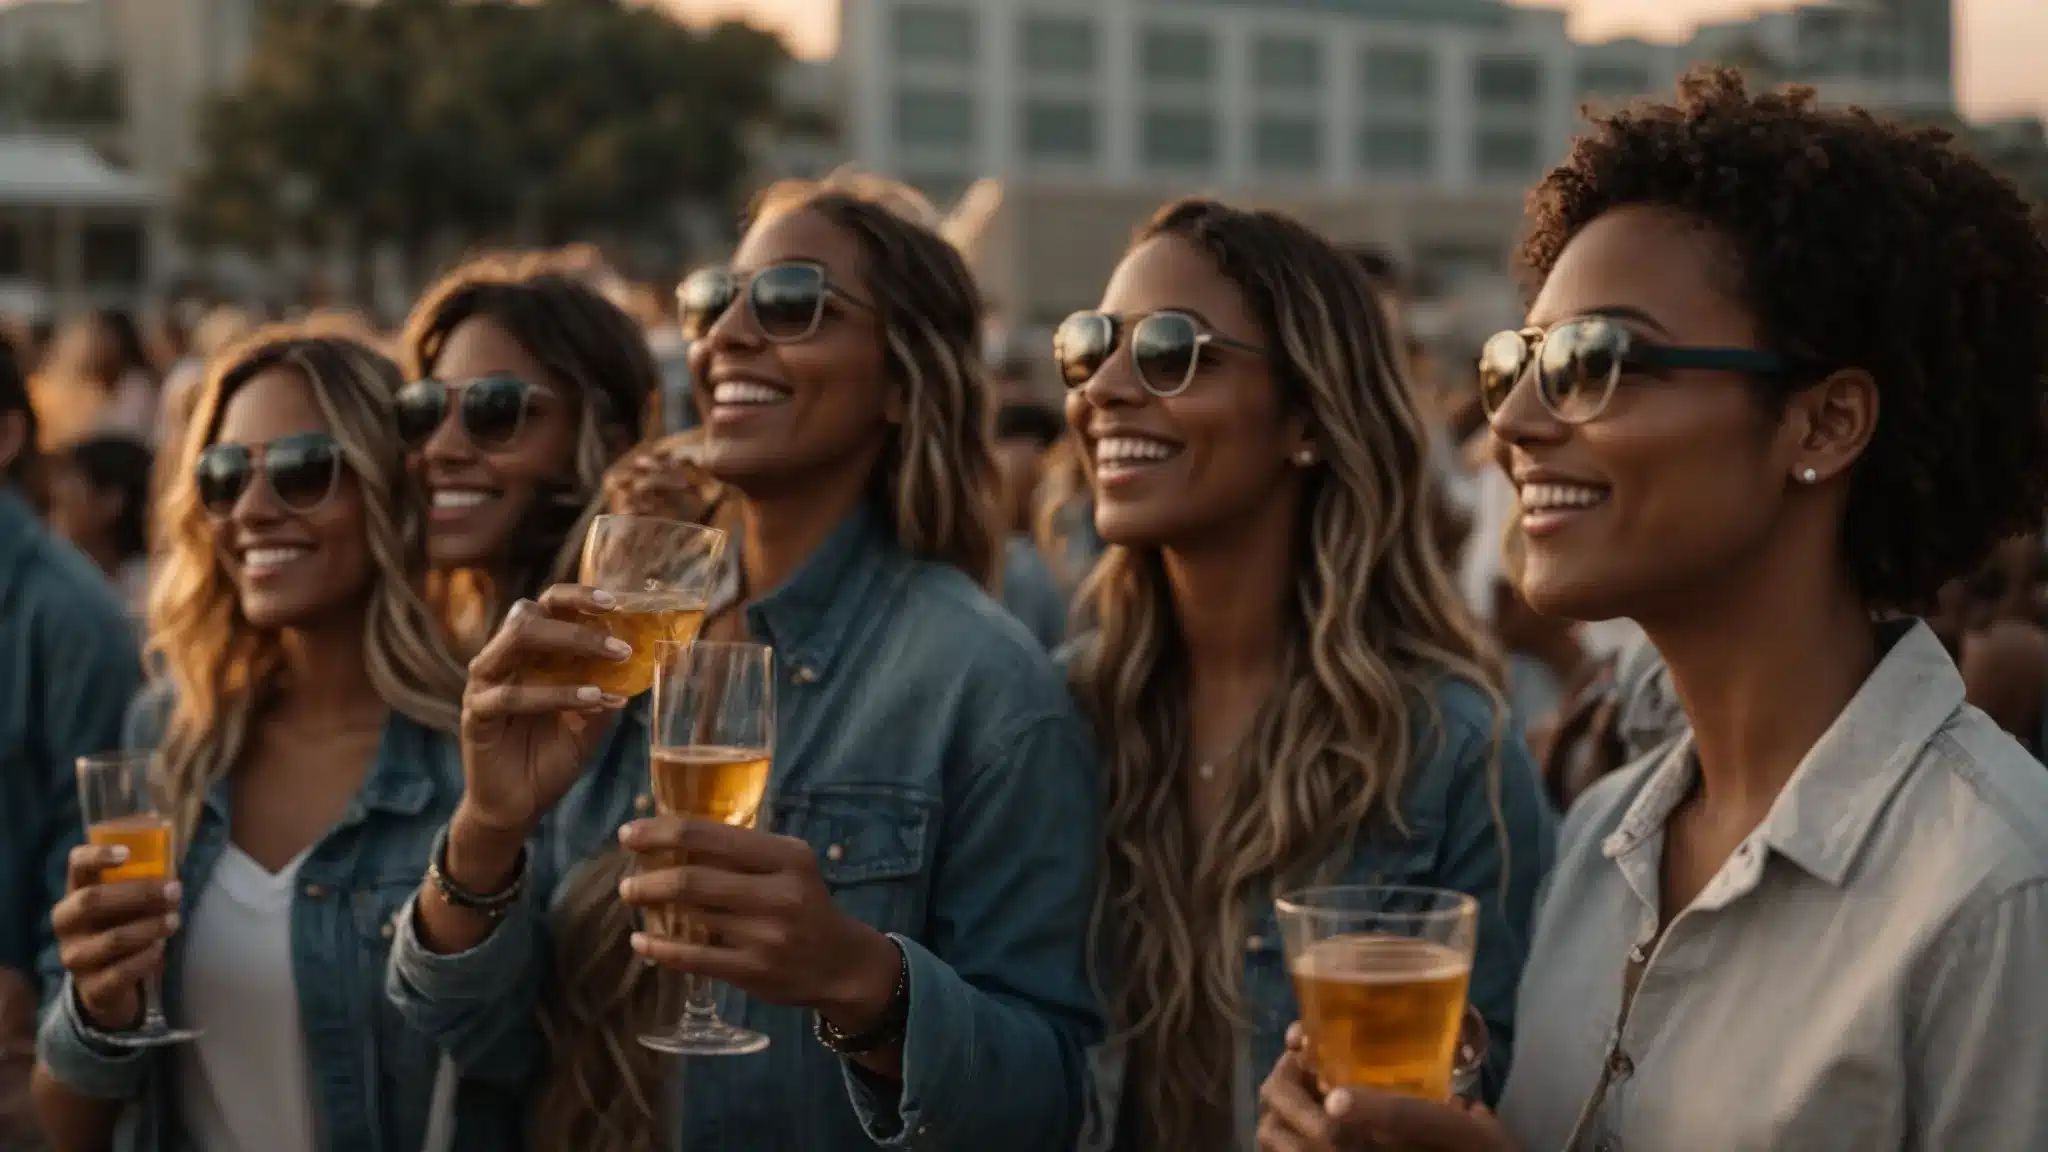 A Group Of Diverse Smiling People Wearing Branded Apparel And Raising Their Glasses In A Toast During A Sunset Outdoor Event.